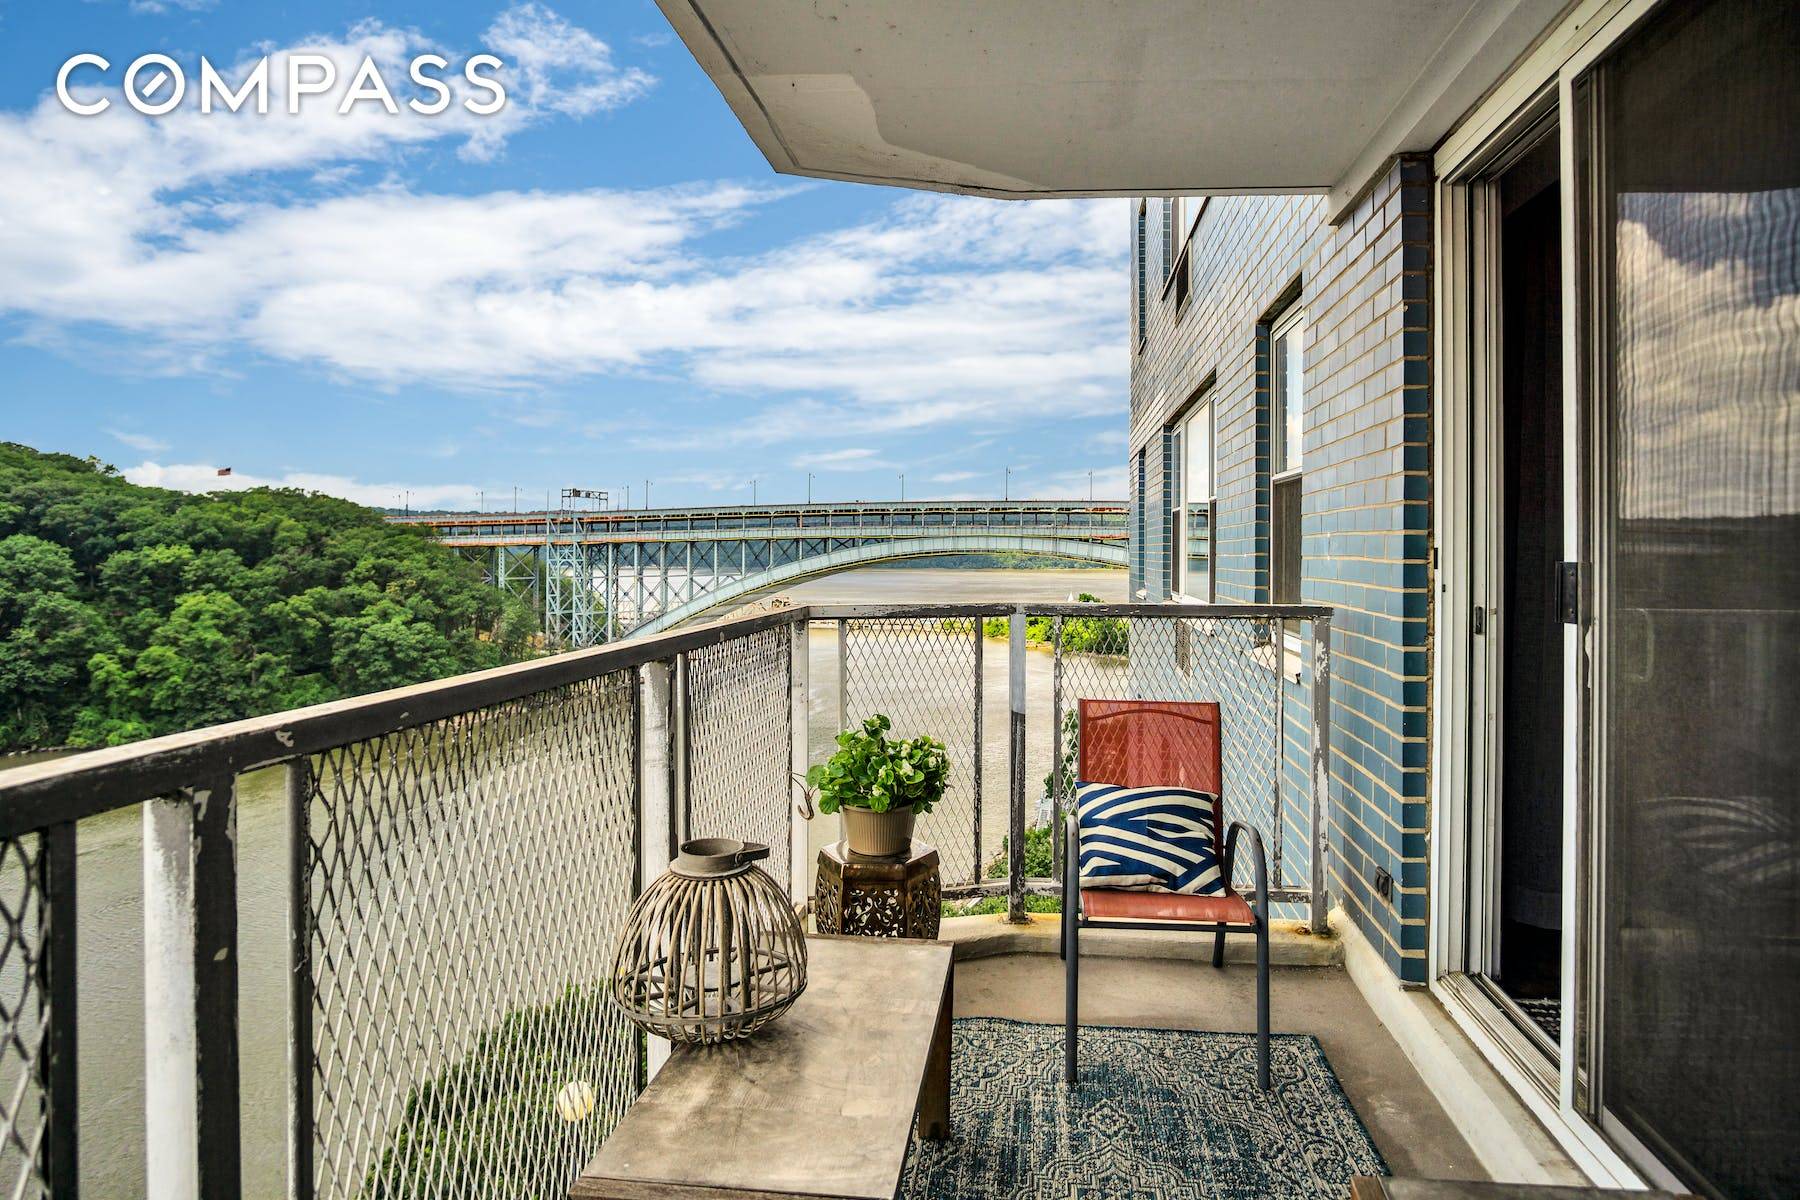 DON'T MISS THIS ICONIC MID CENTURY MODERN APARTMENT OVERLOOKING THE HARLEM AND HUDSON RIVERS.